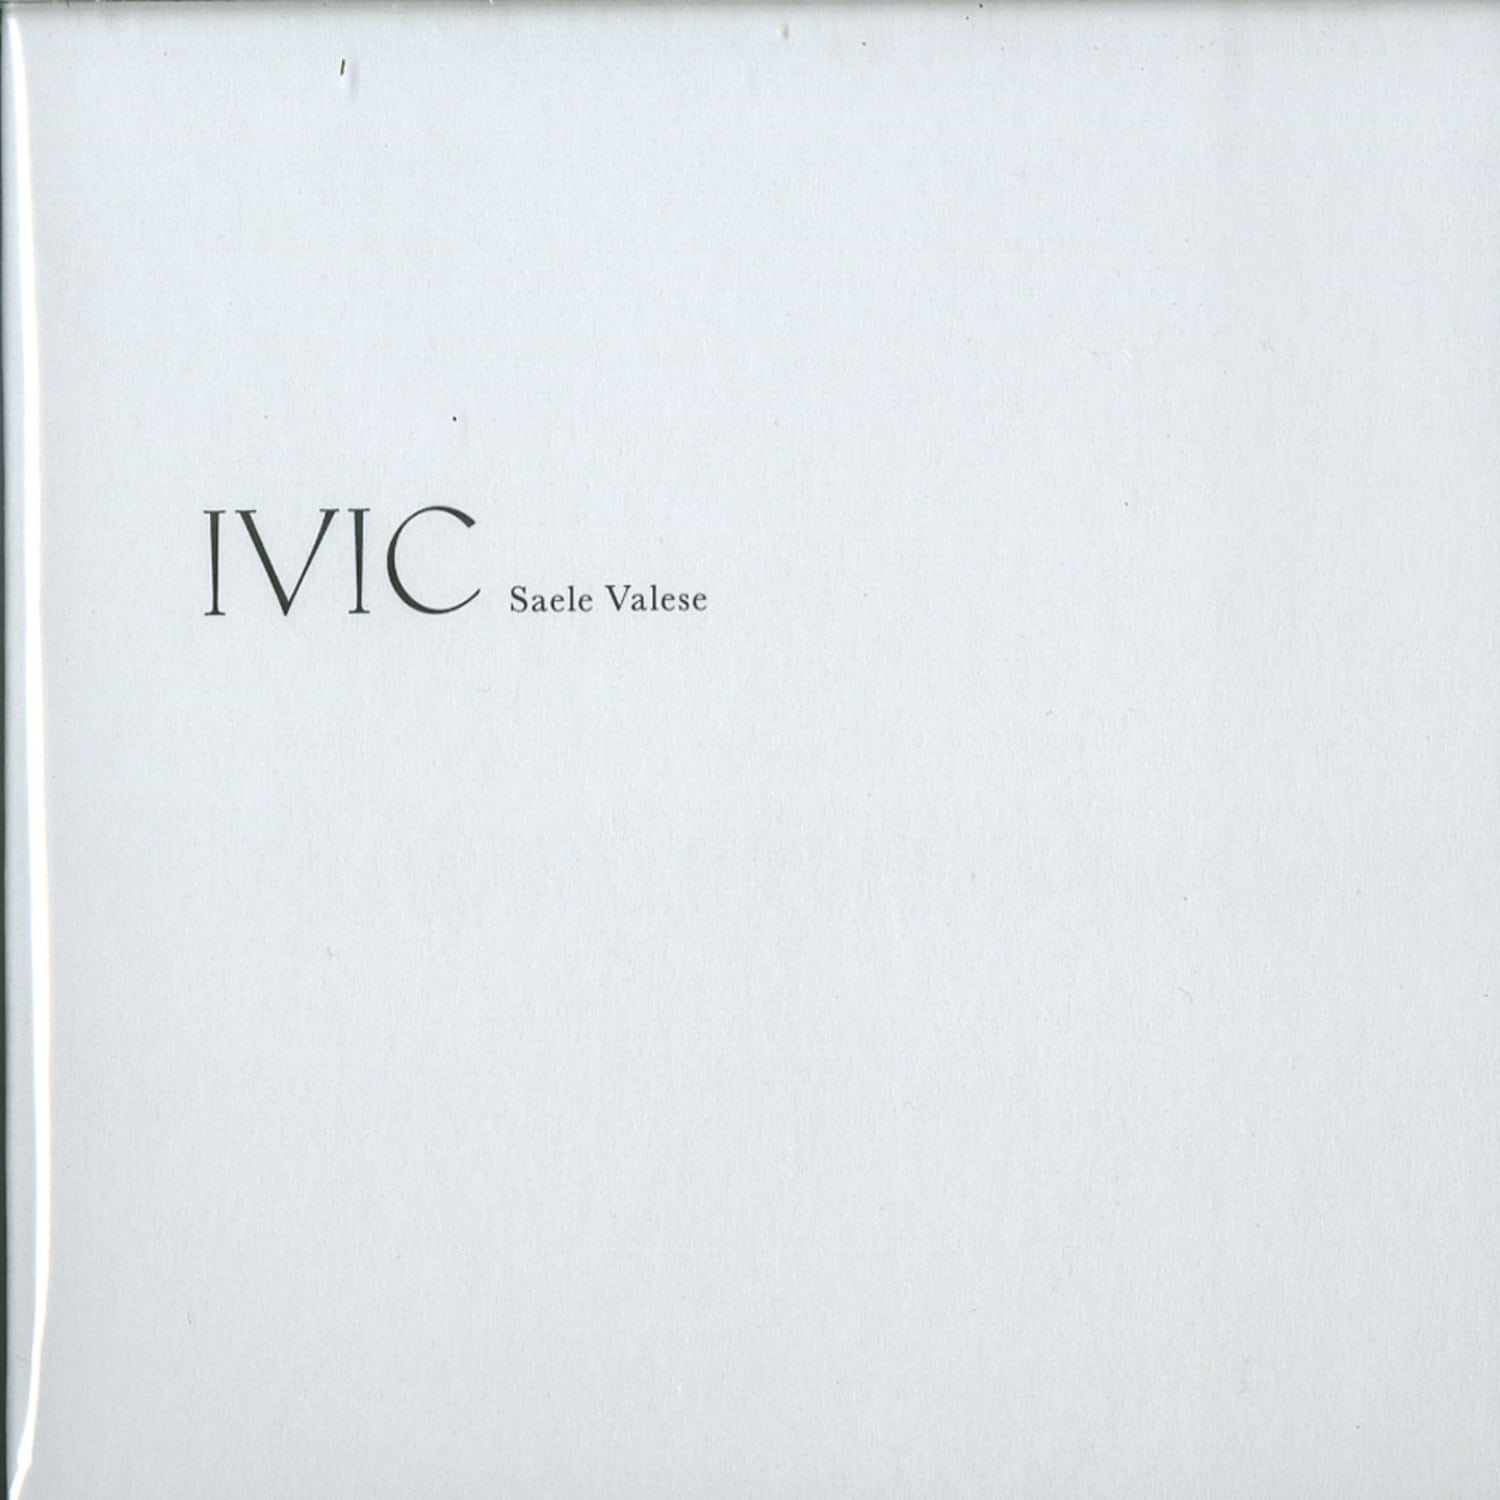 Saele Valese - IVIC LP 